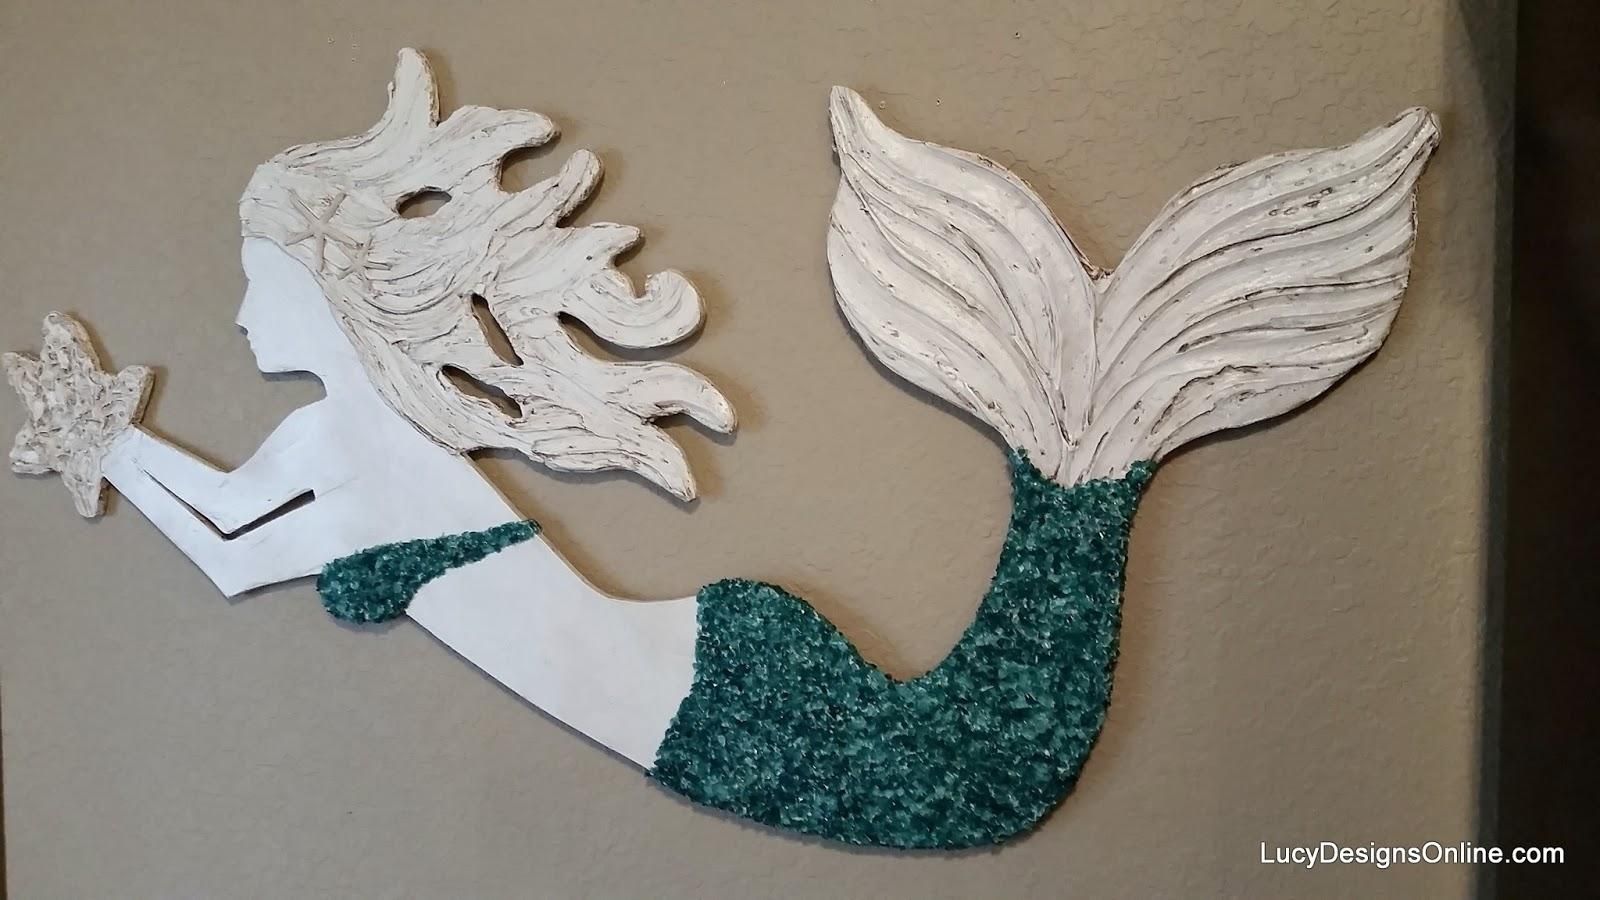 Featured Photo of The 20 Best Collection of Wooden Mermaid Wall Art